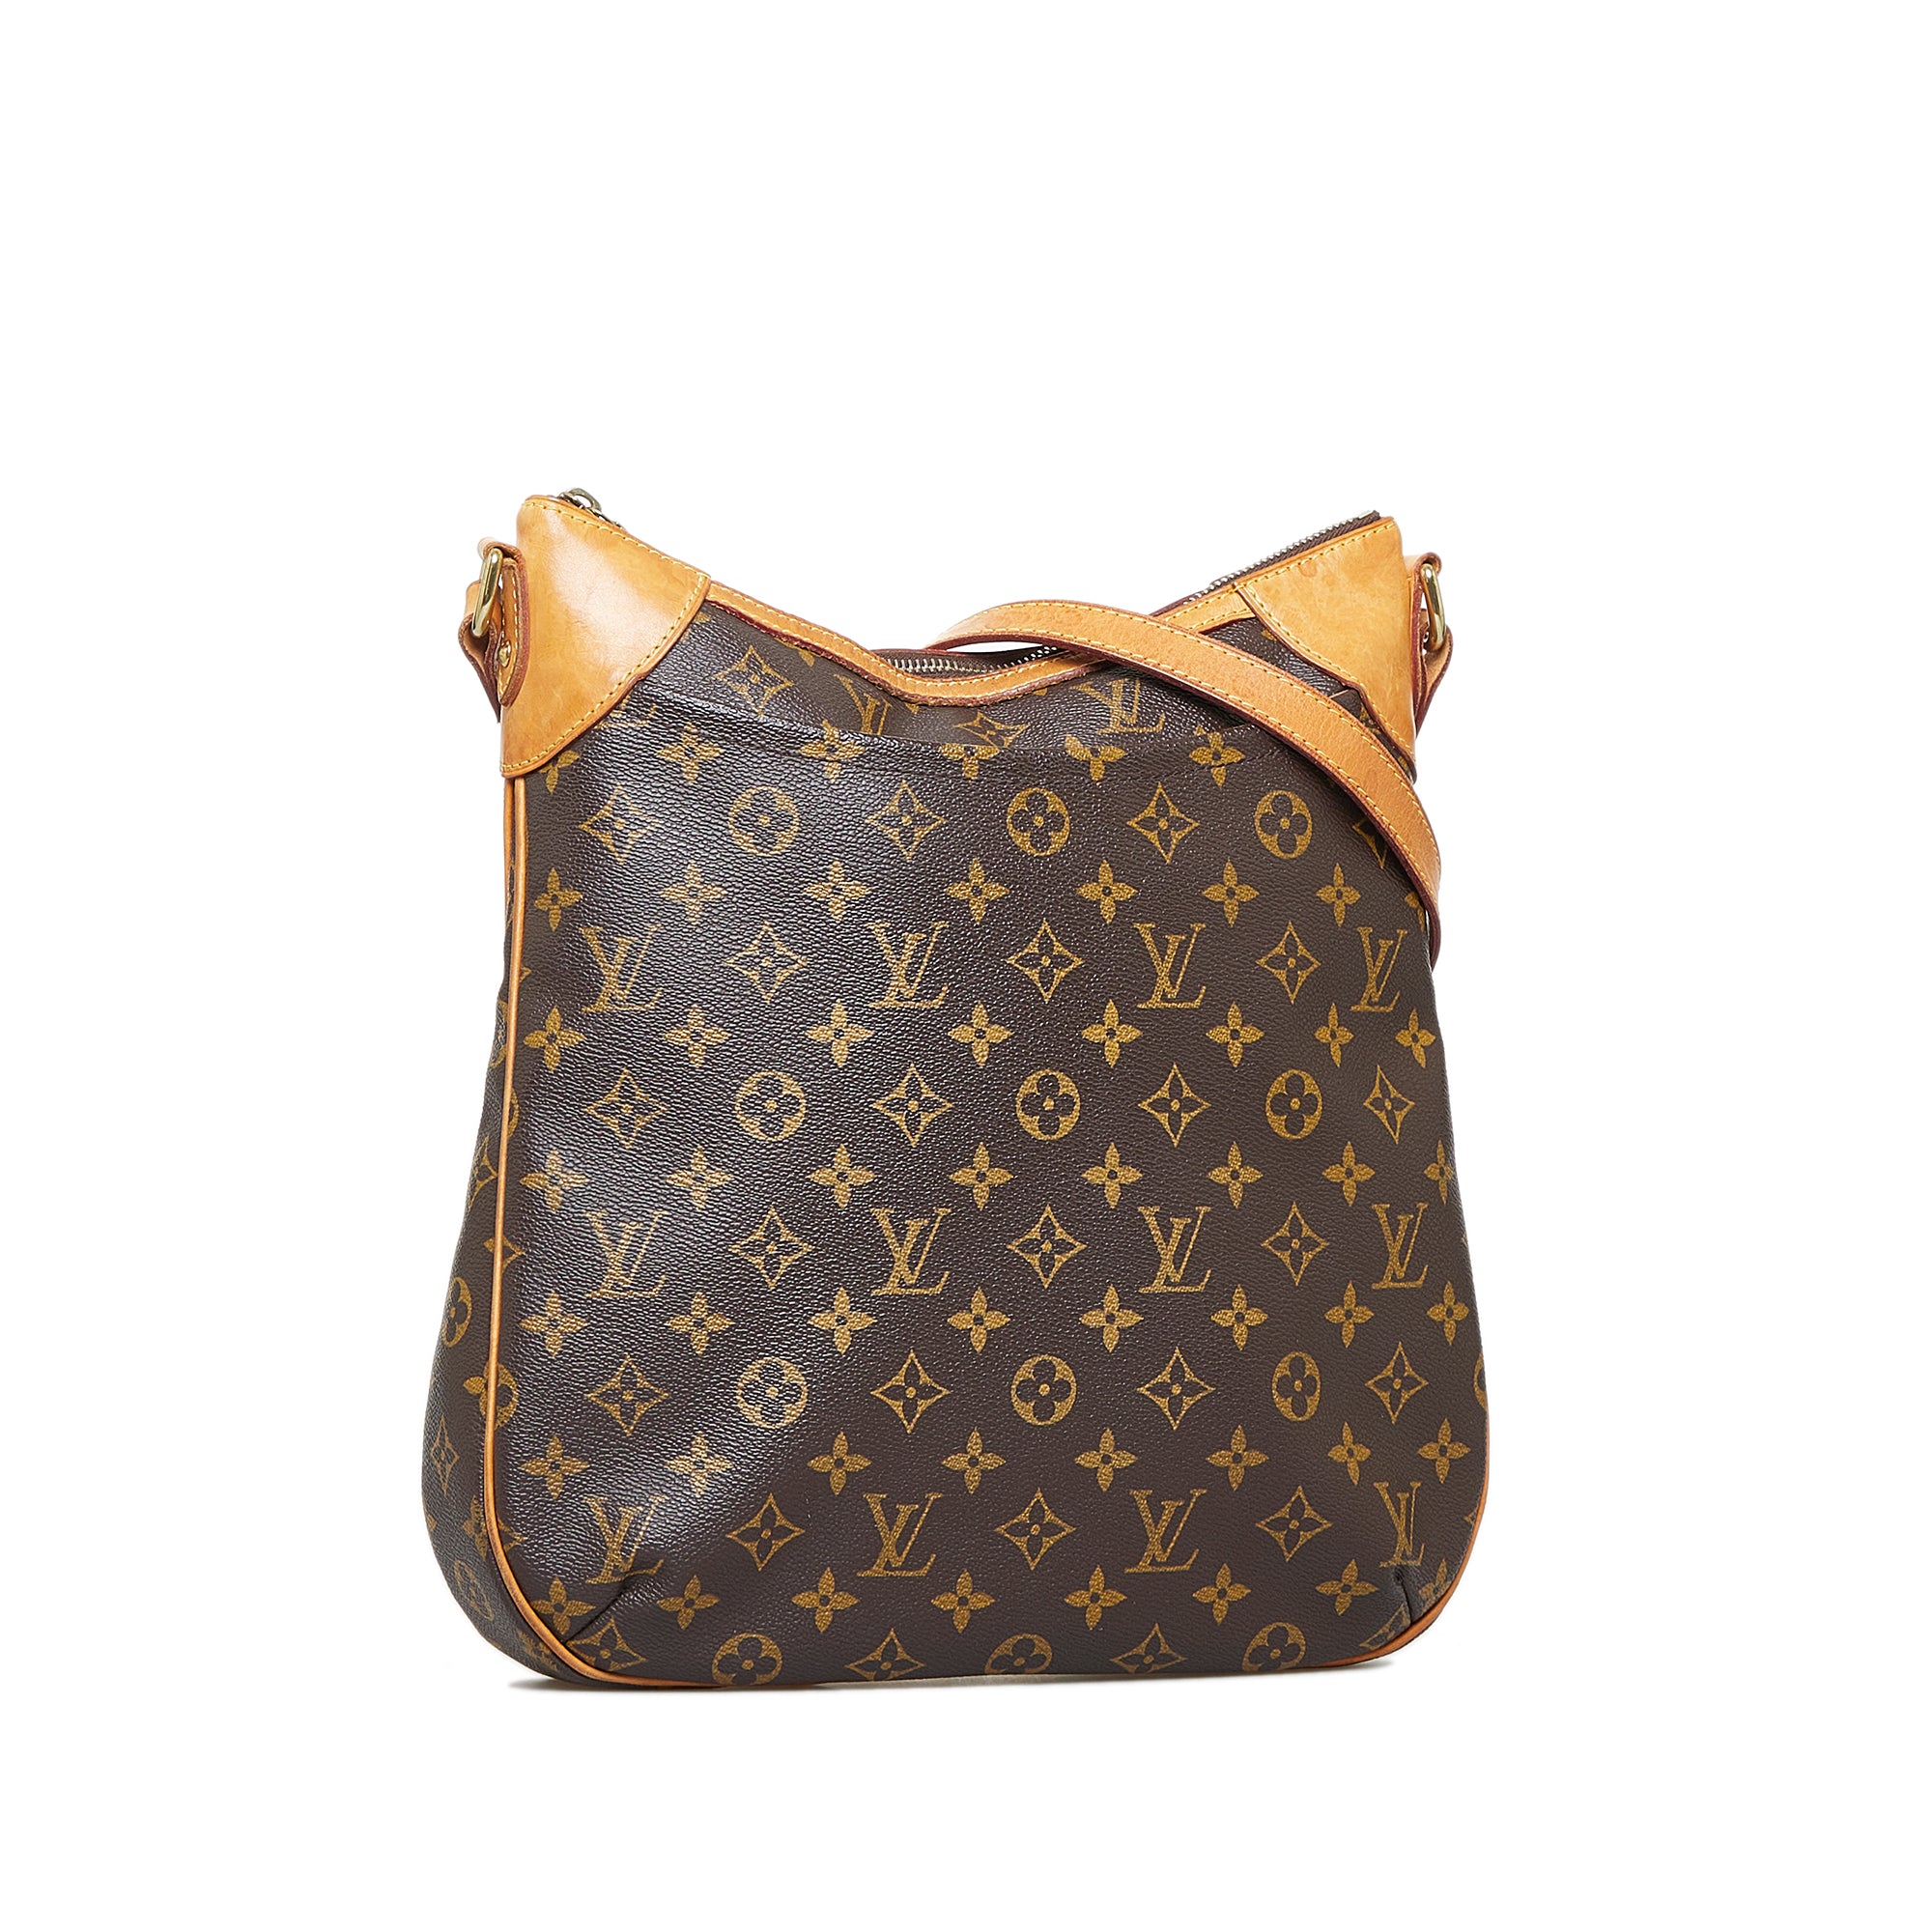 OMG!!! A review of my flawed Louis Vuitton Odeon MM 